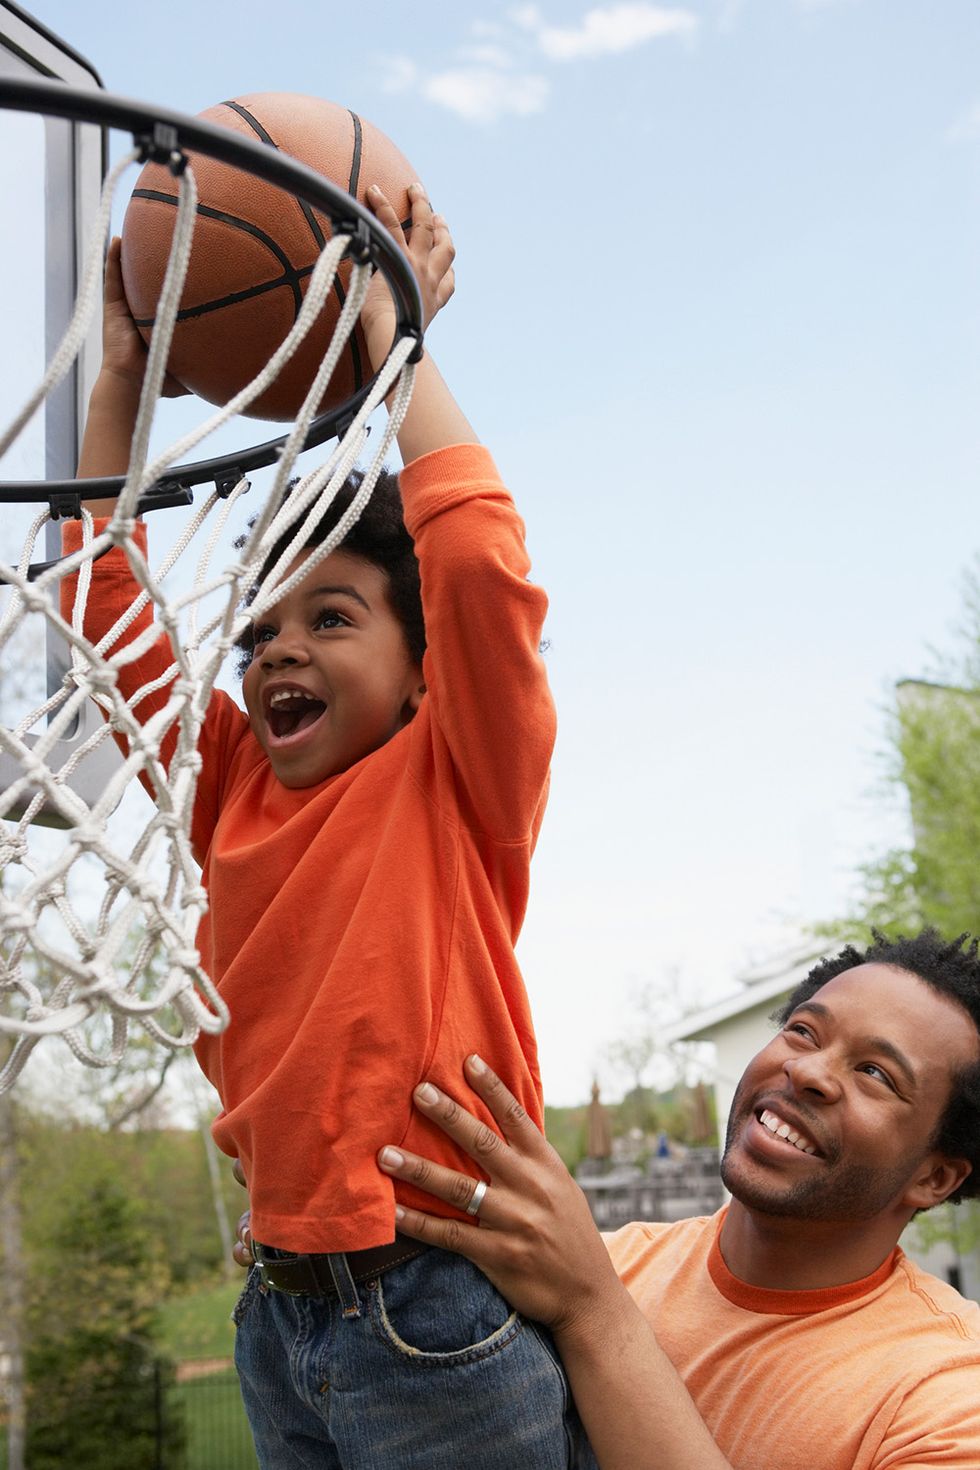 father holding his toddler son up to basketball hoop so he can dunk